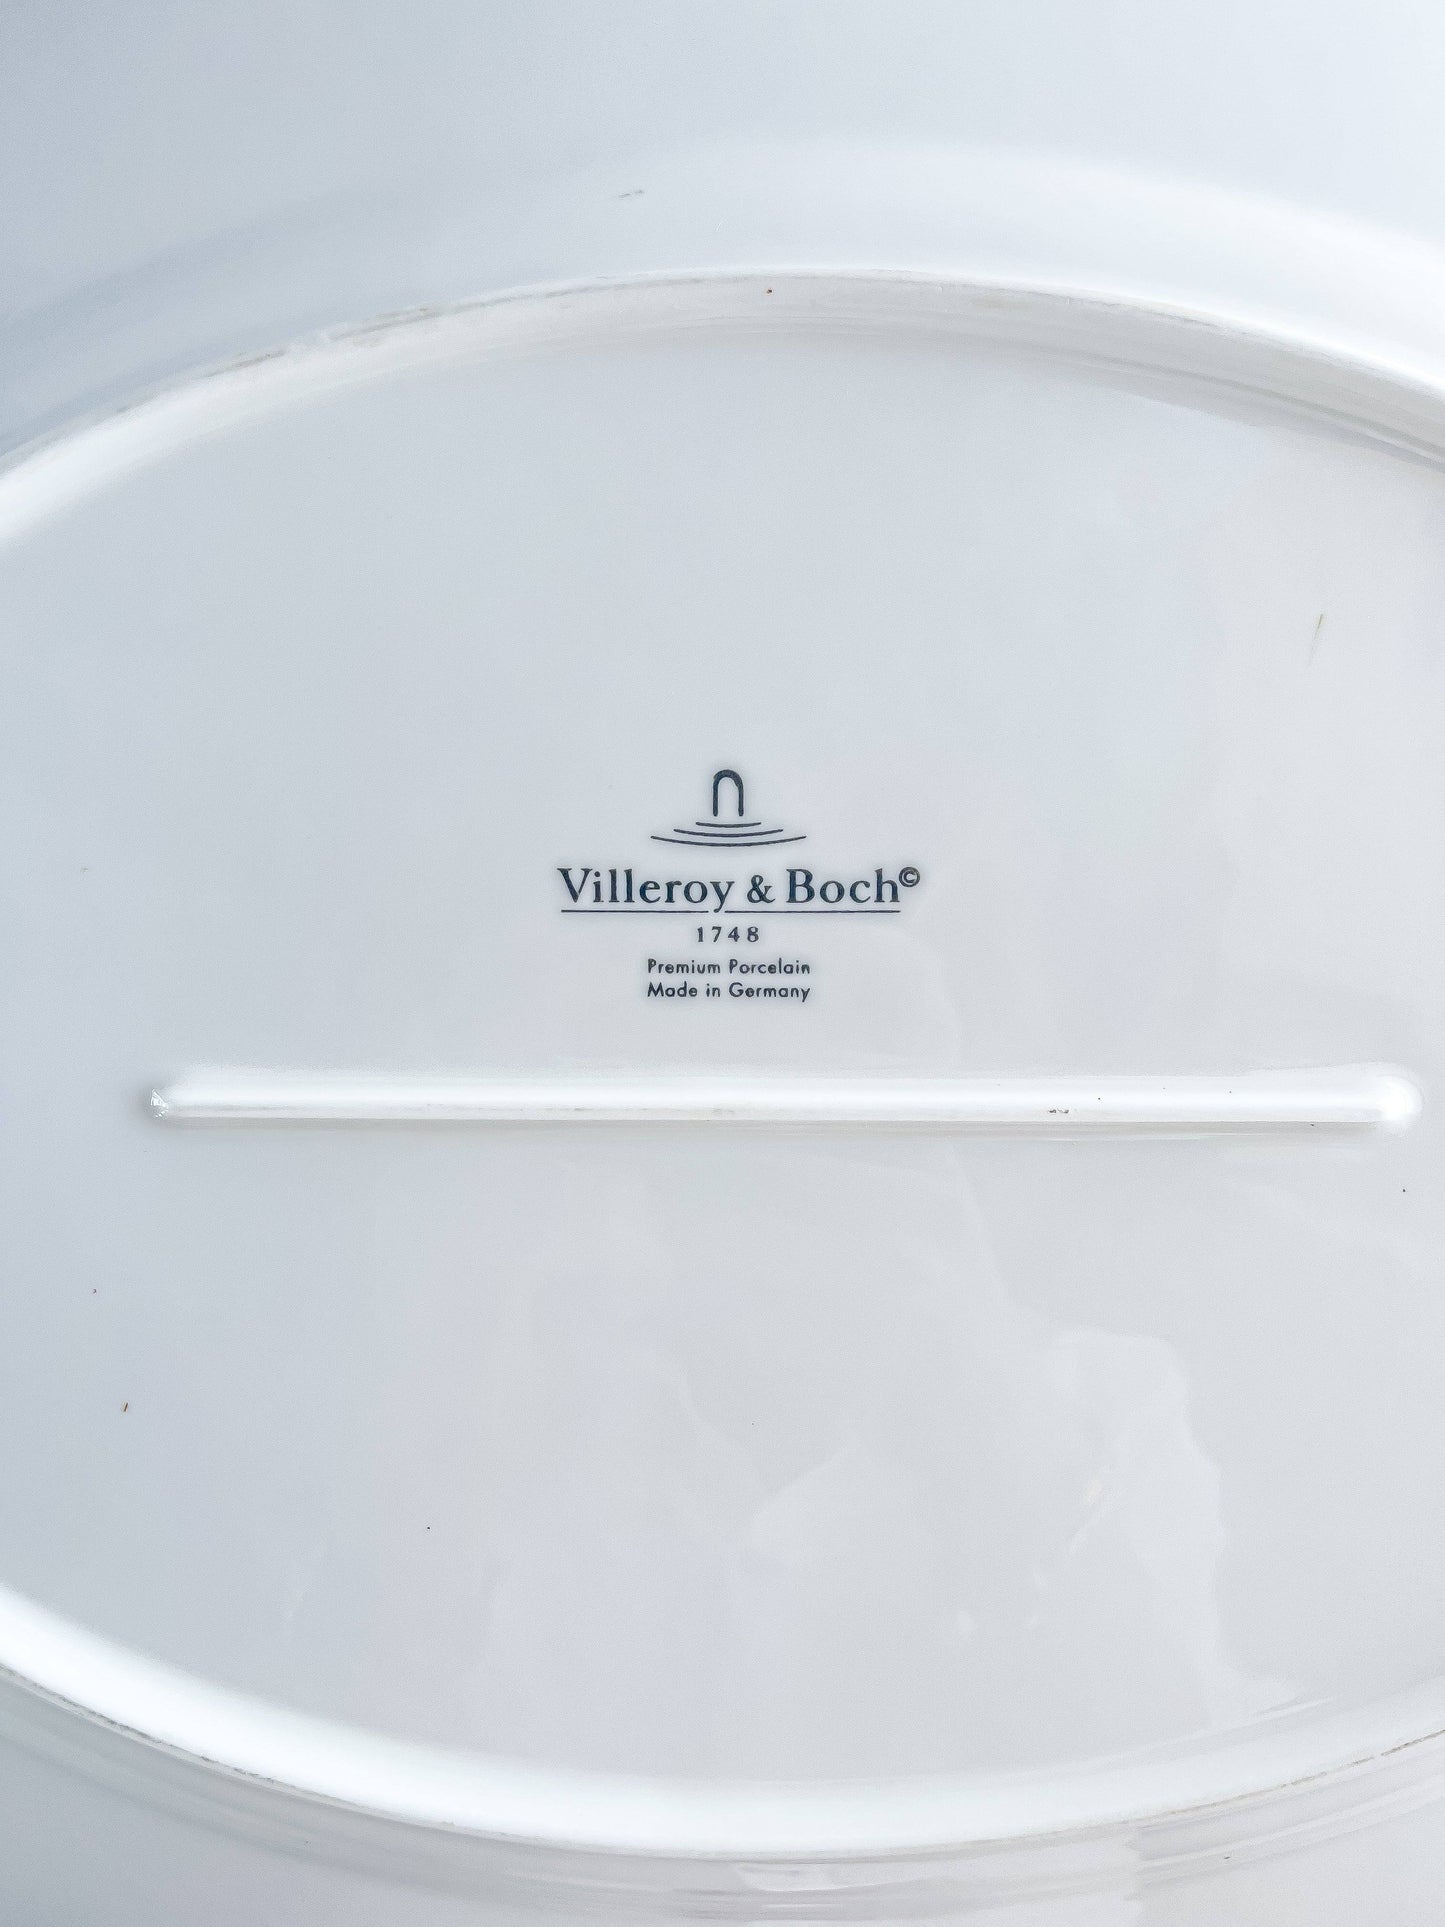 Villeroy & Boch 'Vieux Luxembourg' Large Oval Platter - SOSC Home